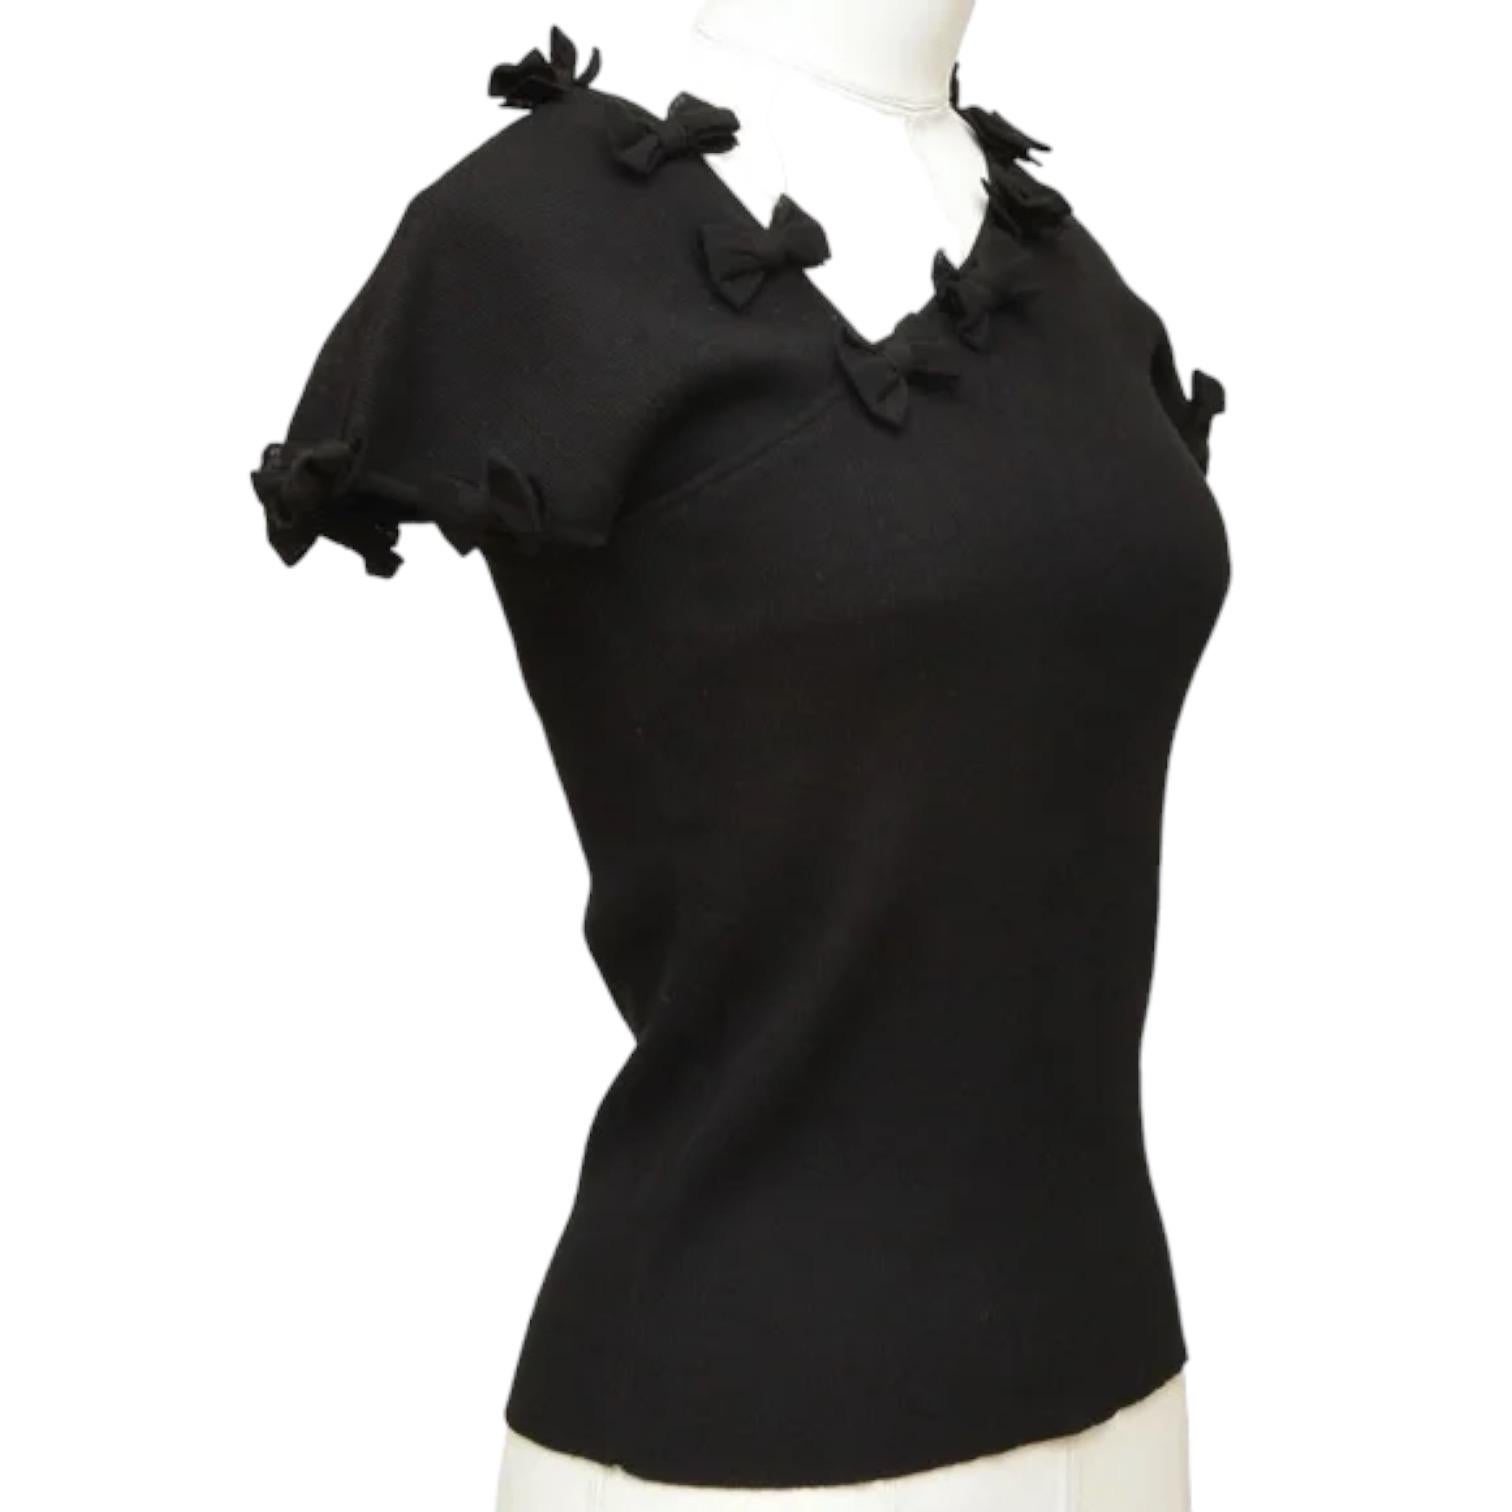 GUARANTEED AUTHENTIC CHANEL BLACK CAP SLEEVE KNIT

Design:
 - Cap sleeve black knit.
 - Off center v-neck.
 - Bow detail.
 - Pullover.
 - CC logo plaque at left hip.

Fabric: 82% Cotton, 18% Polyamide

Size: 36

Measurements (Approximate laid flat,